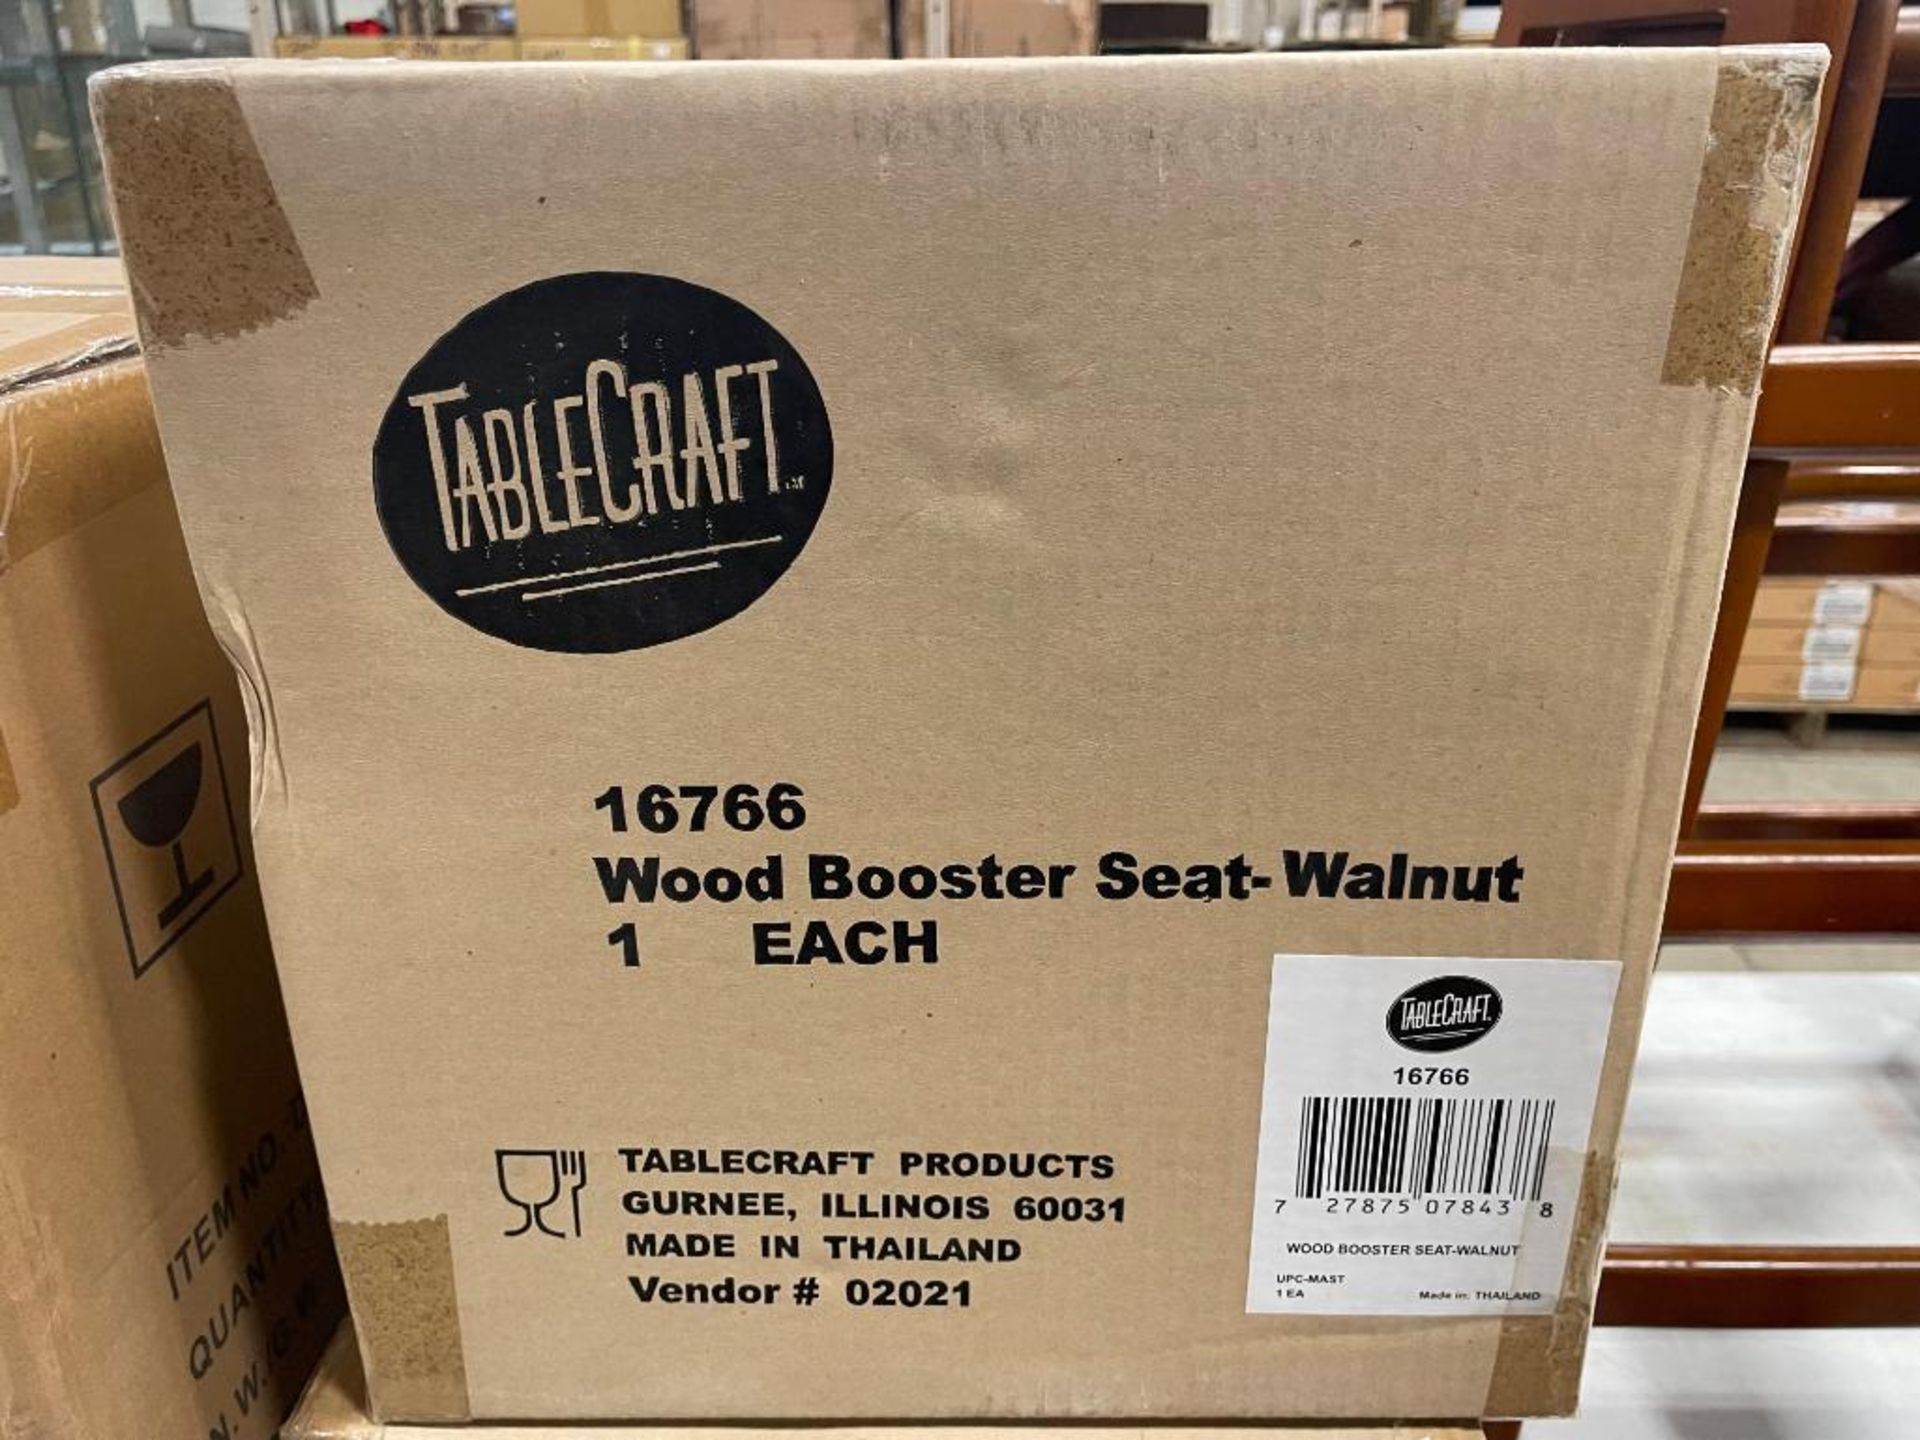 TABLECRAFT 16766 WOOD BOOSTER SEAT-WALNUT - Image 6 of 6